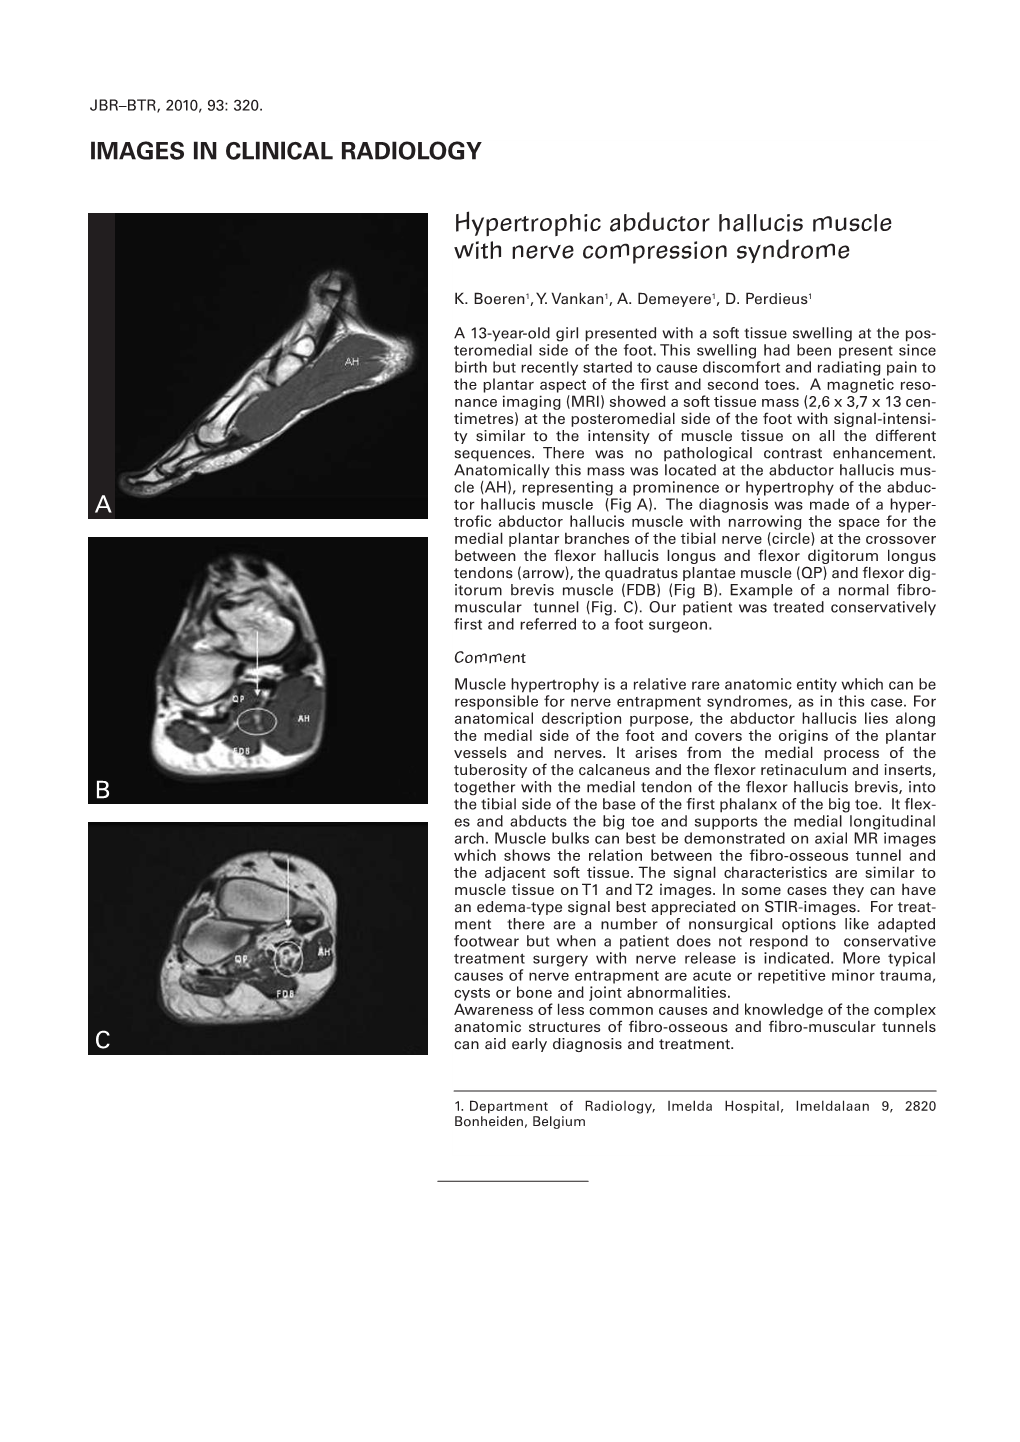 IMAGES in CLINICAL RADIOLOGY Hypertrophic Abductor Hallucis